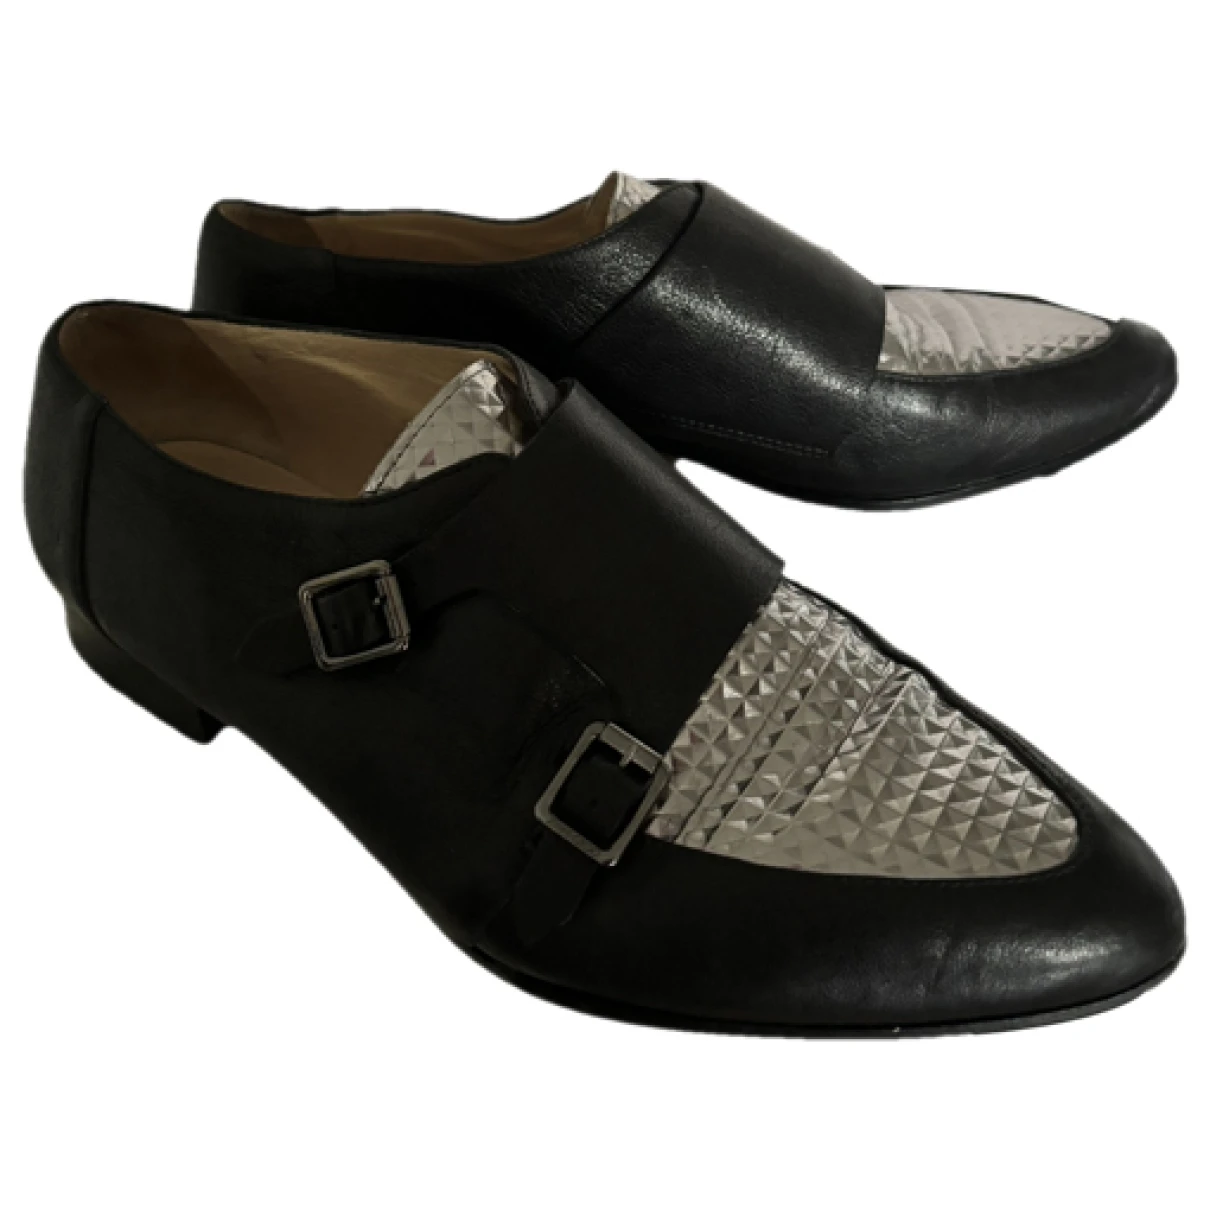 Pre-owned Jimmy Choo Leather Flats In Metallic